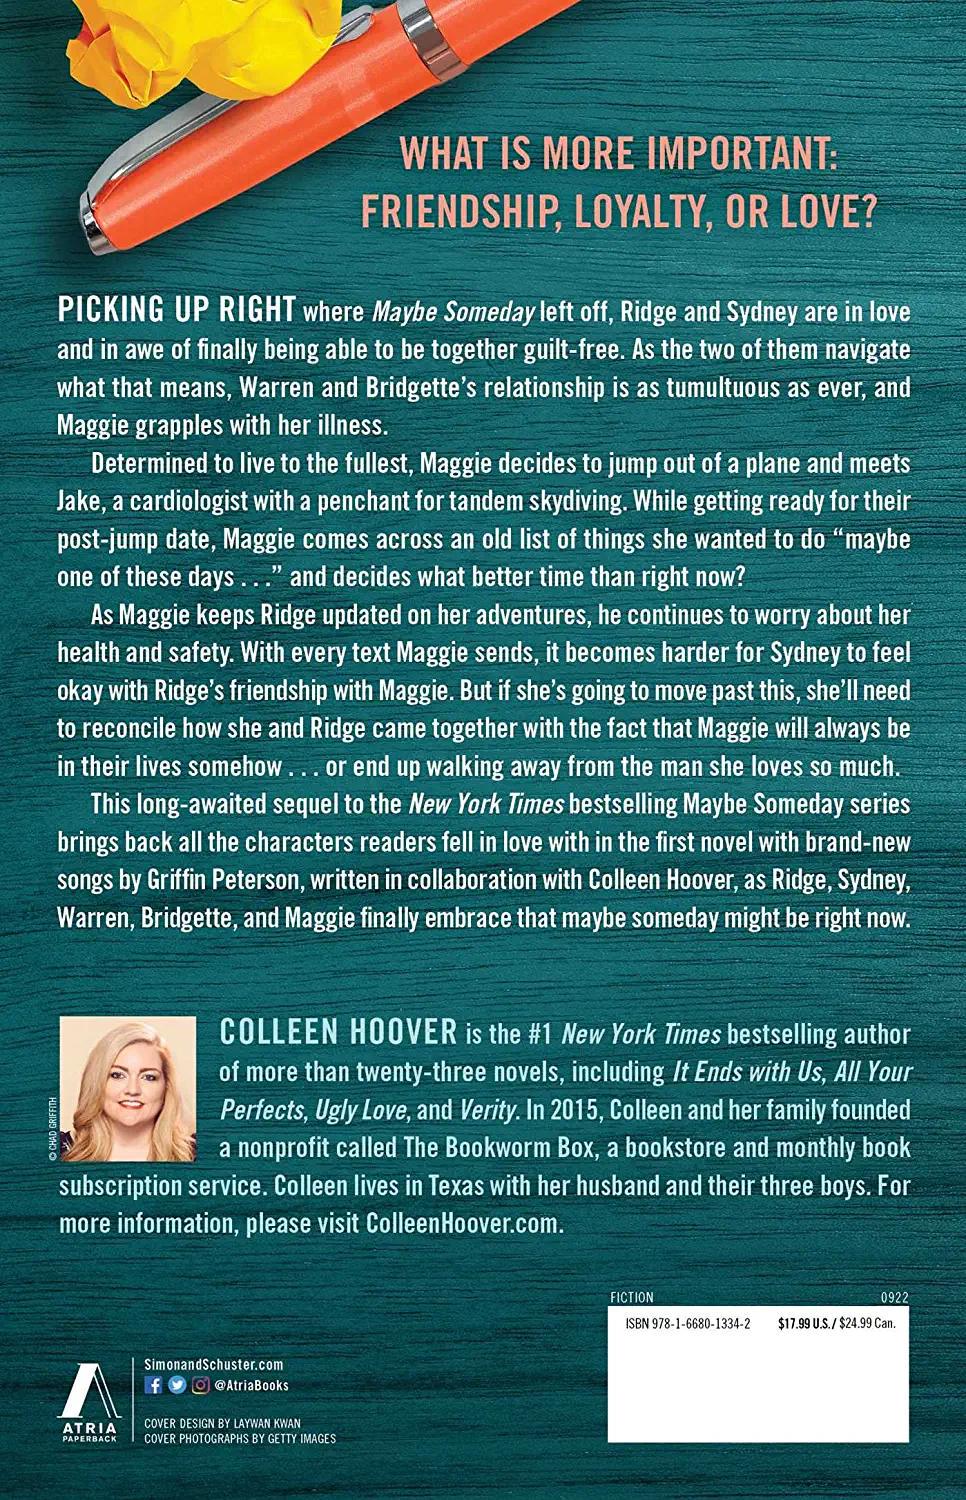 Colleen Hoover, Maybe Now: A Novel (3) (Maybe Someday)